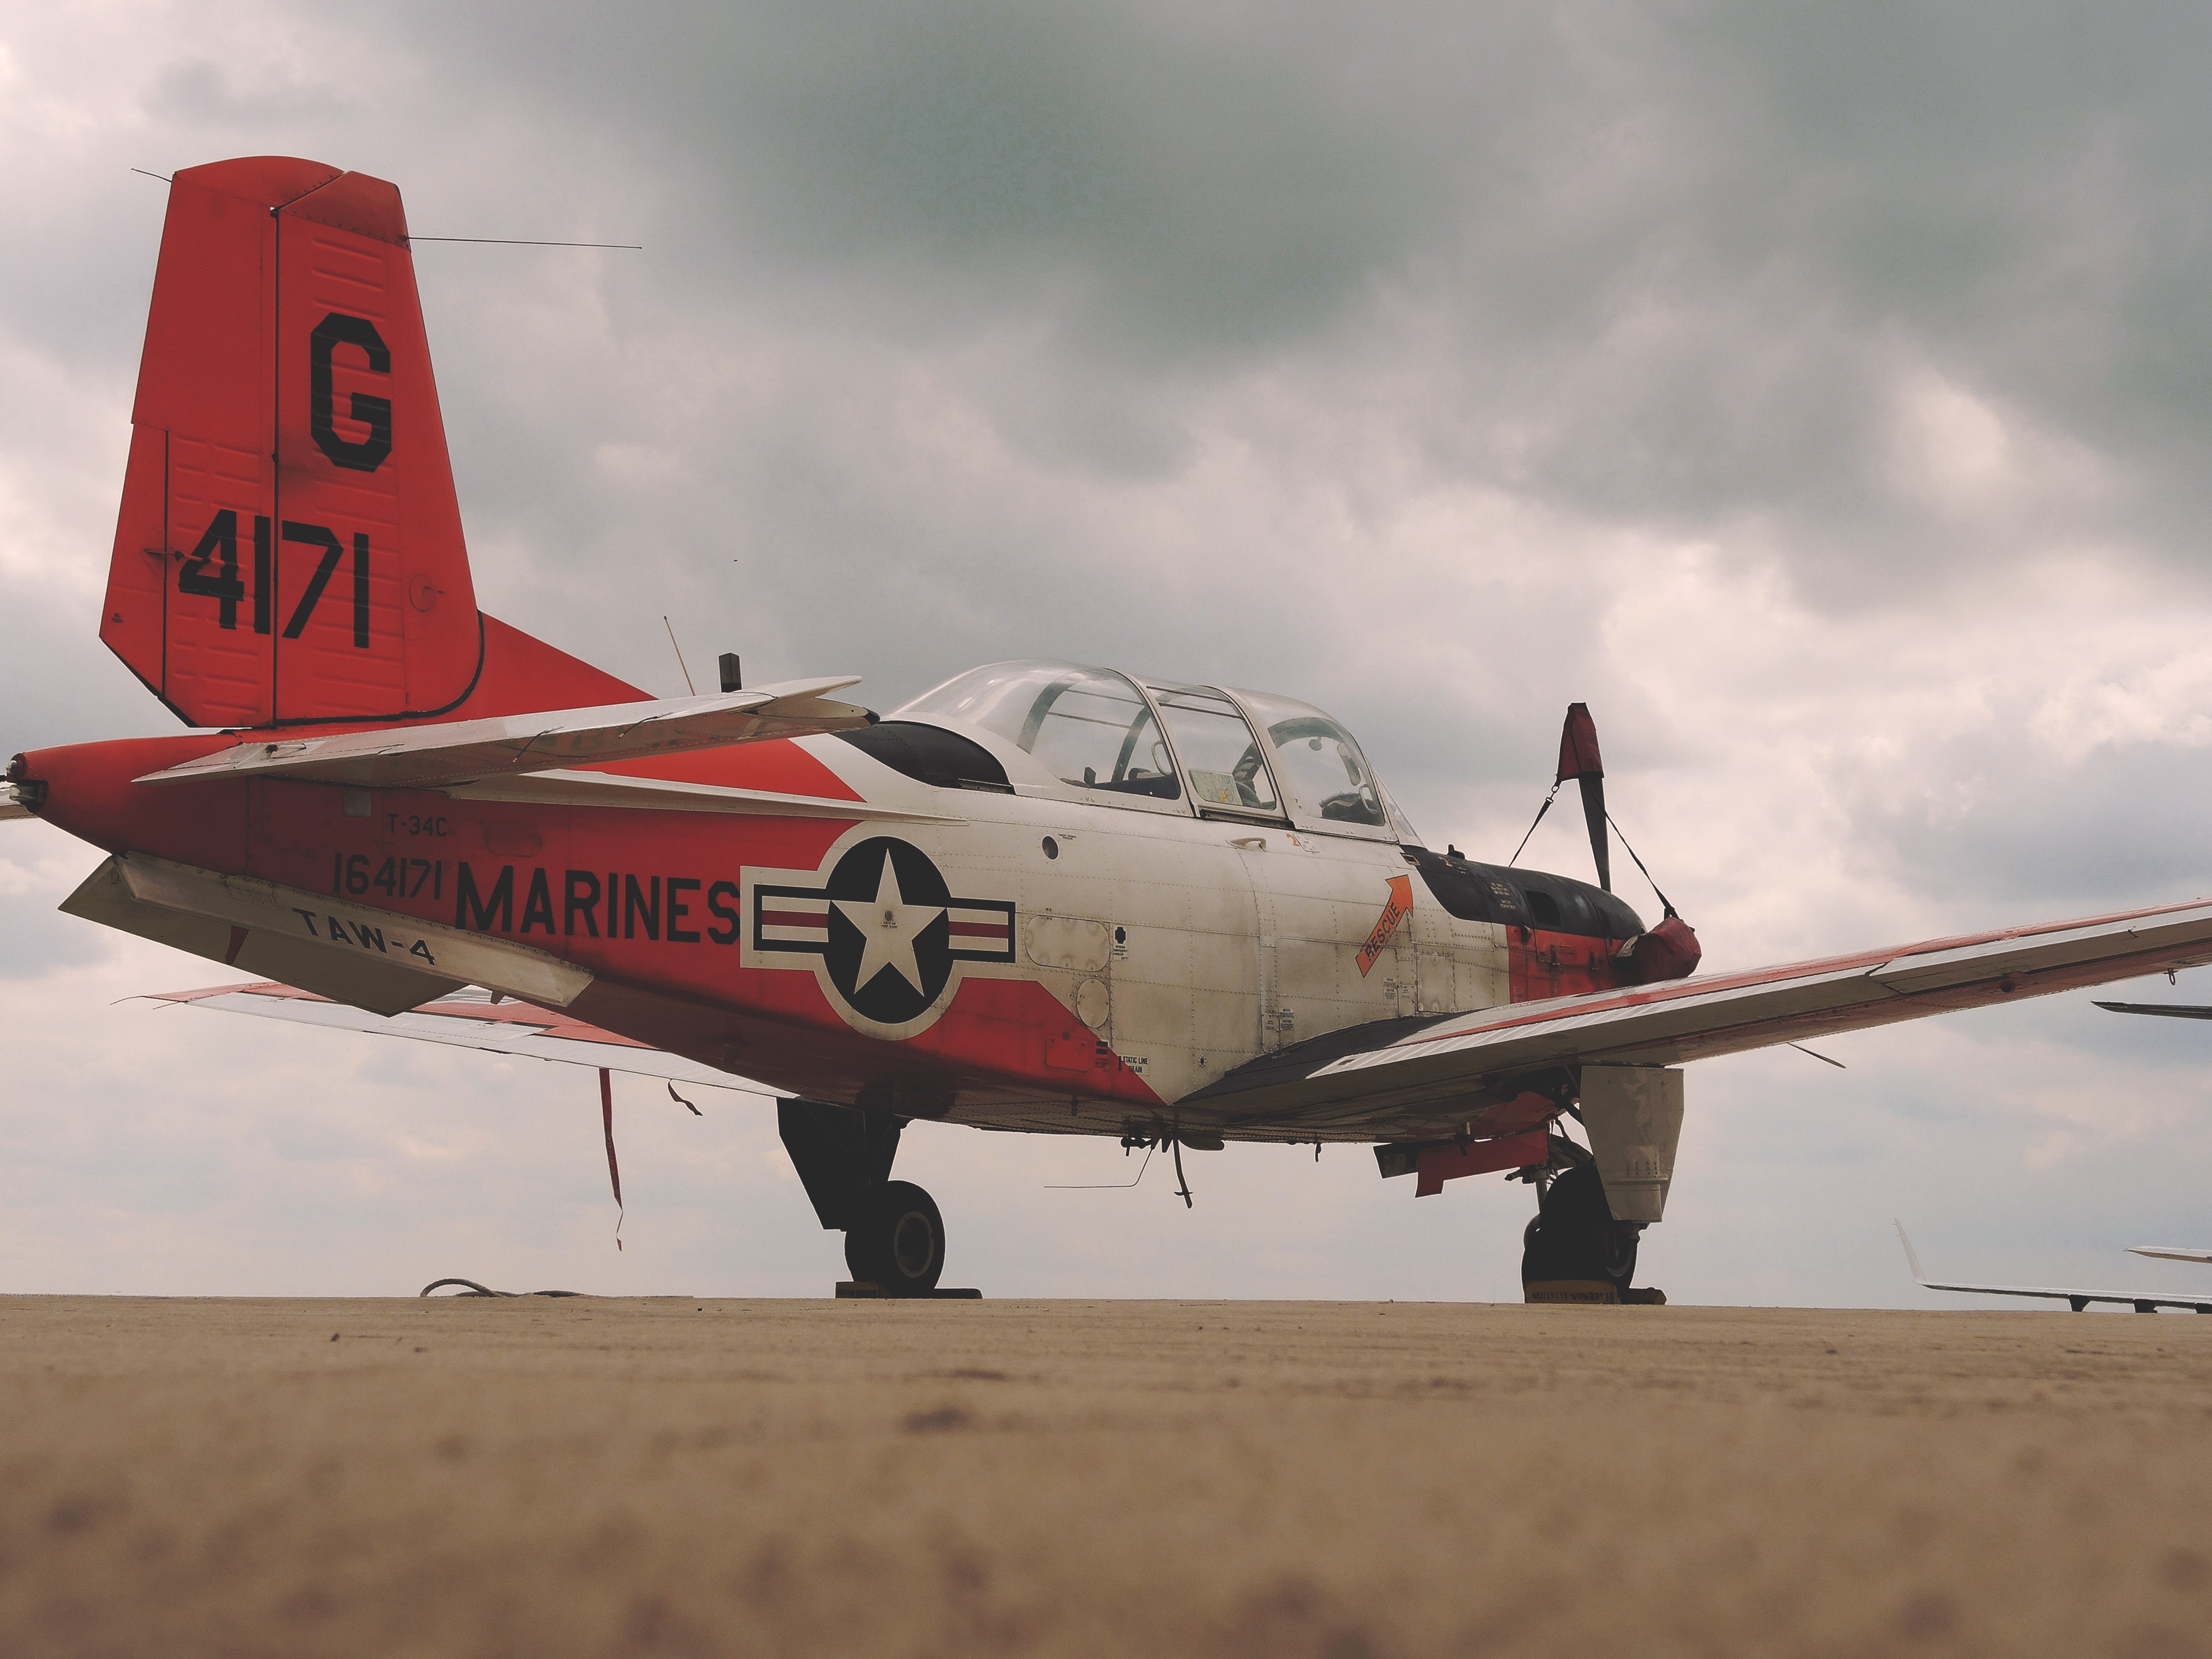 photograph of red and white airplane